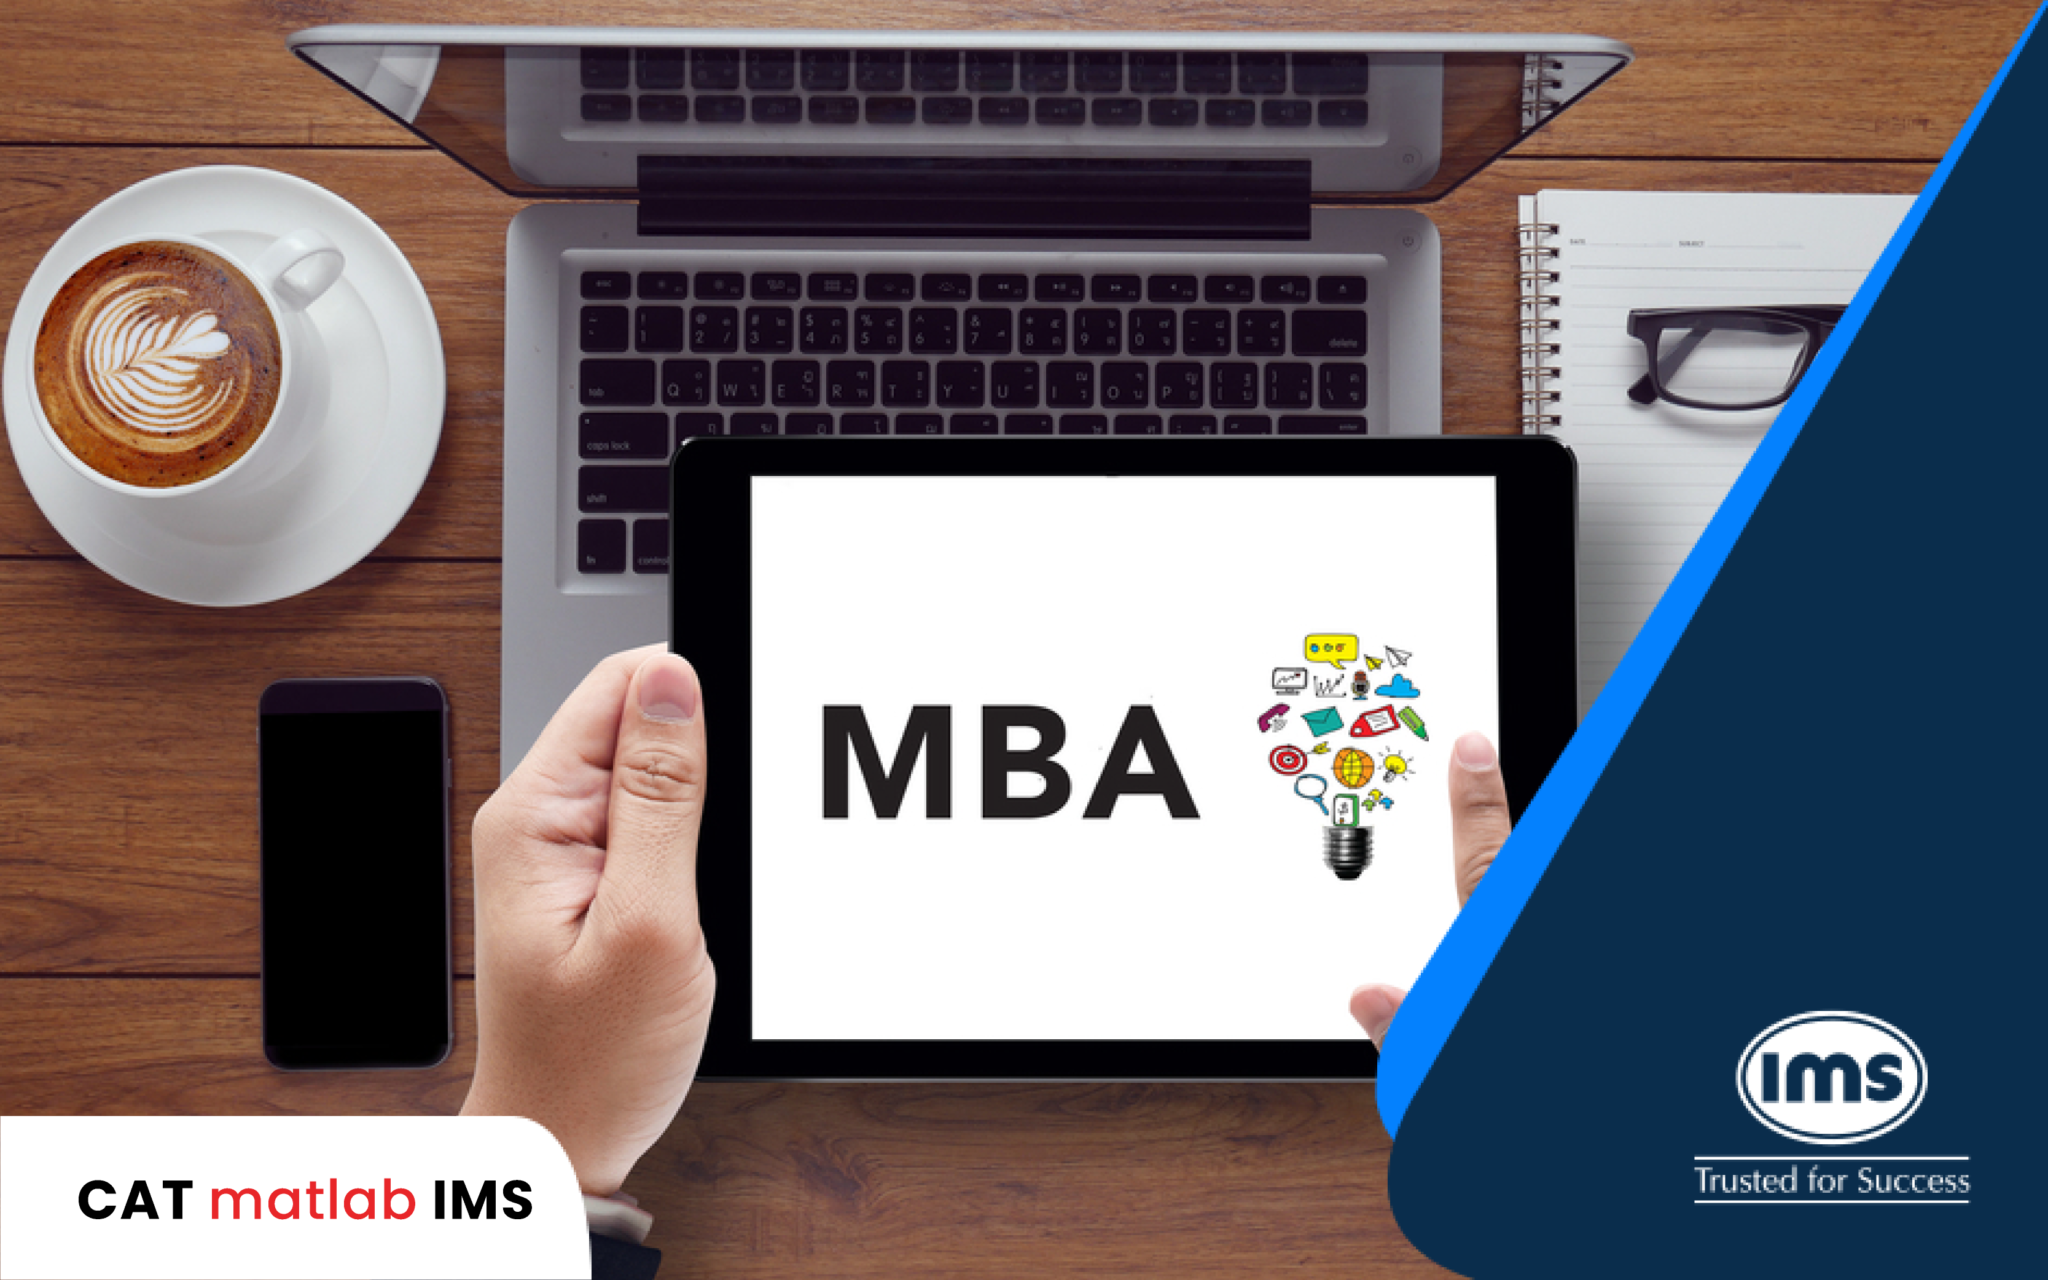 Check top MBA colleges with your CAT 22 scores